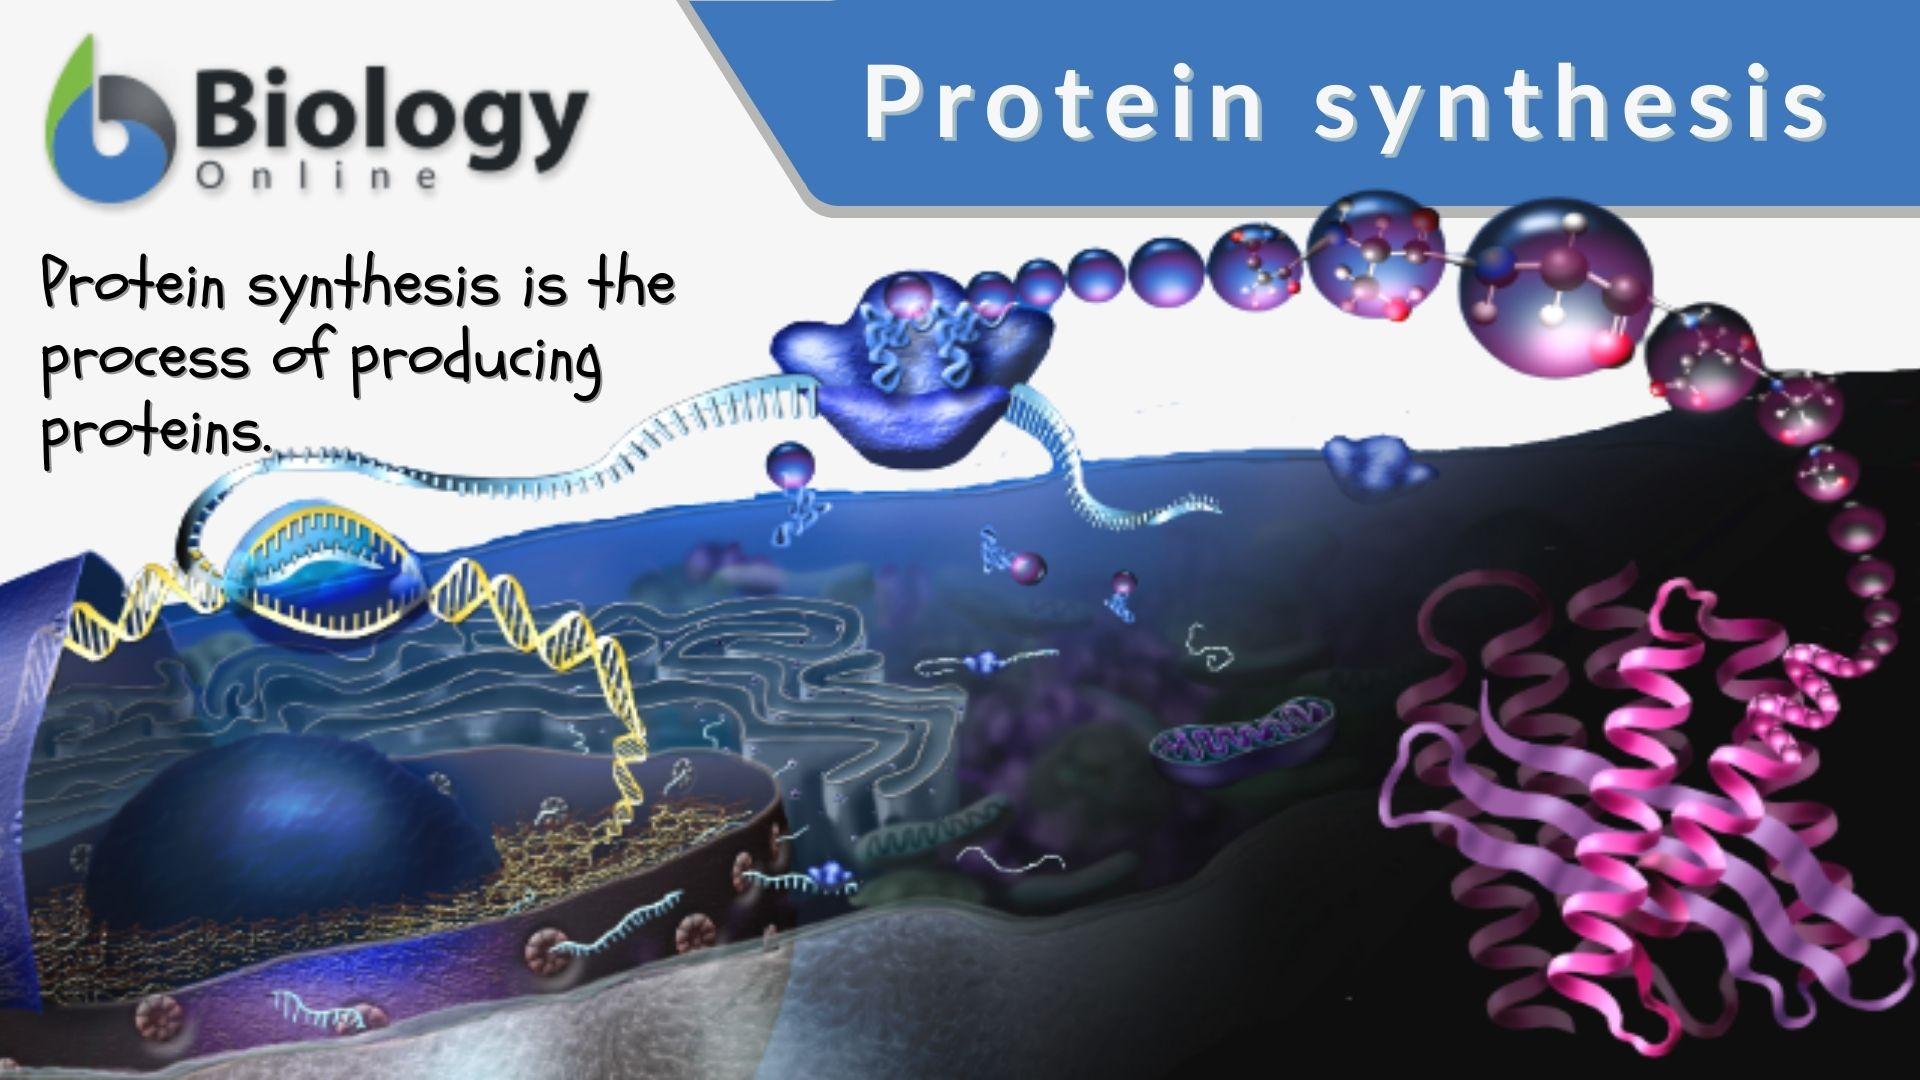 Protein synthesis - Definition and Examples - Biology Online Dictionary